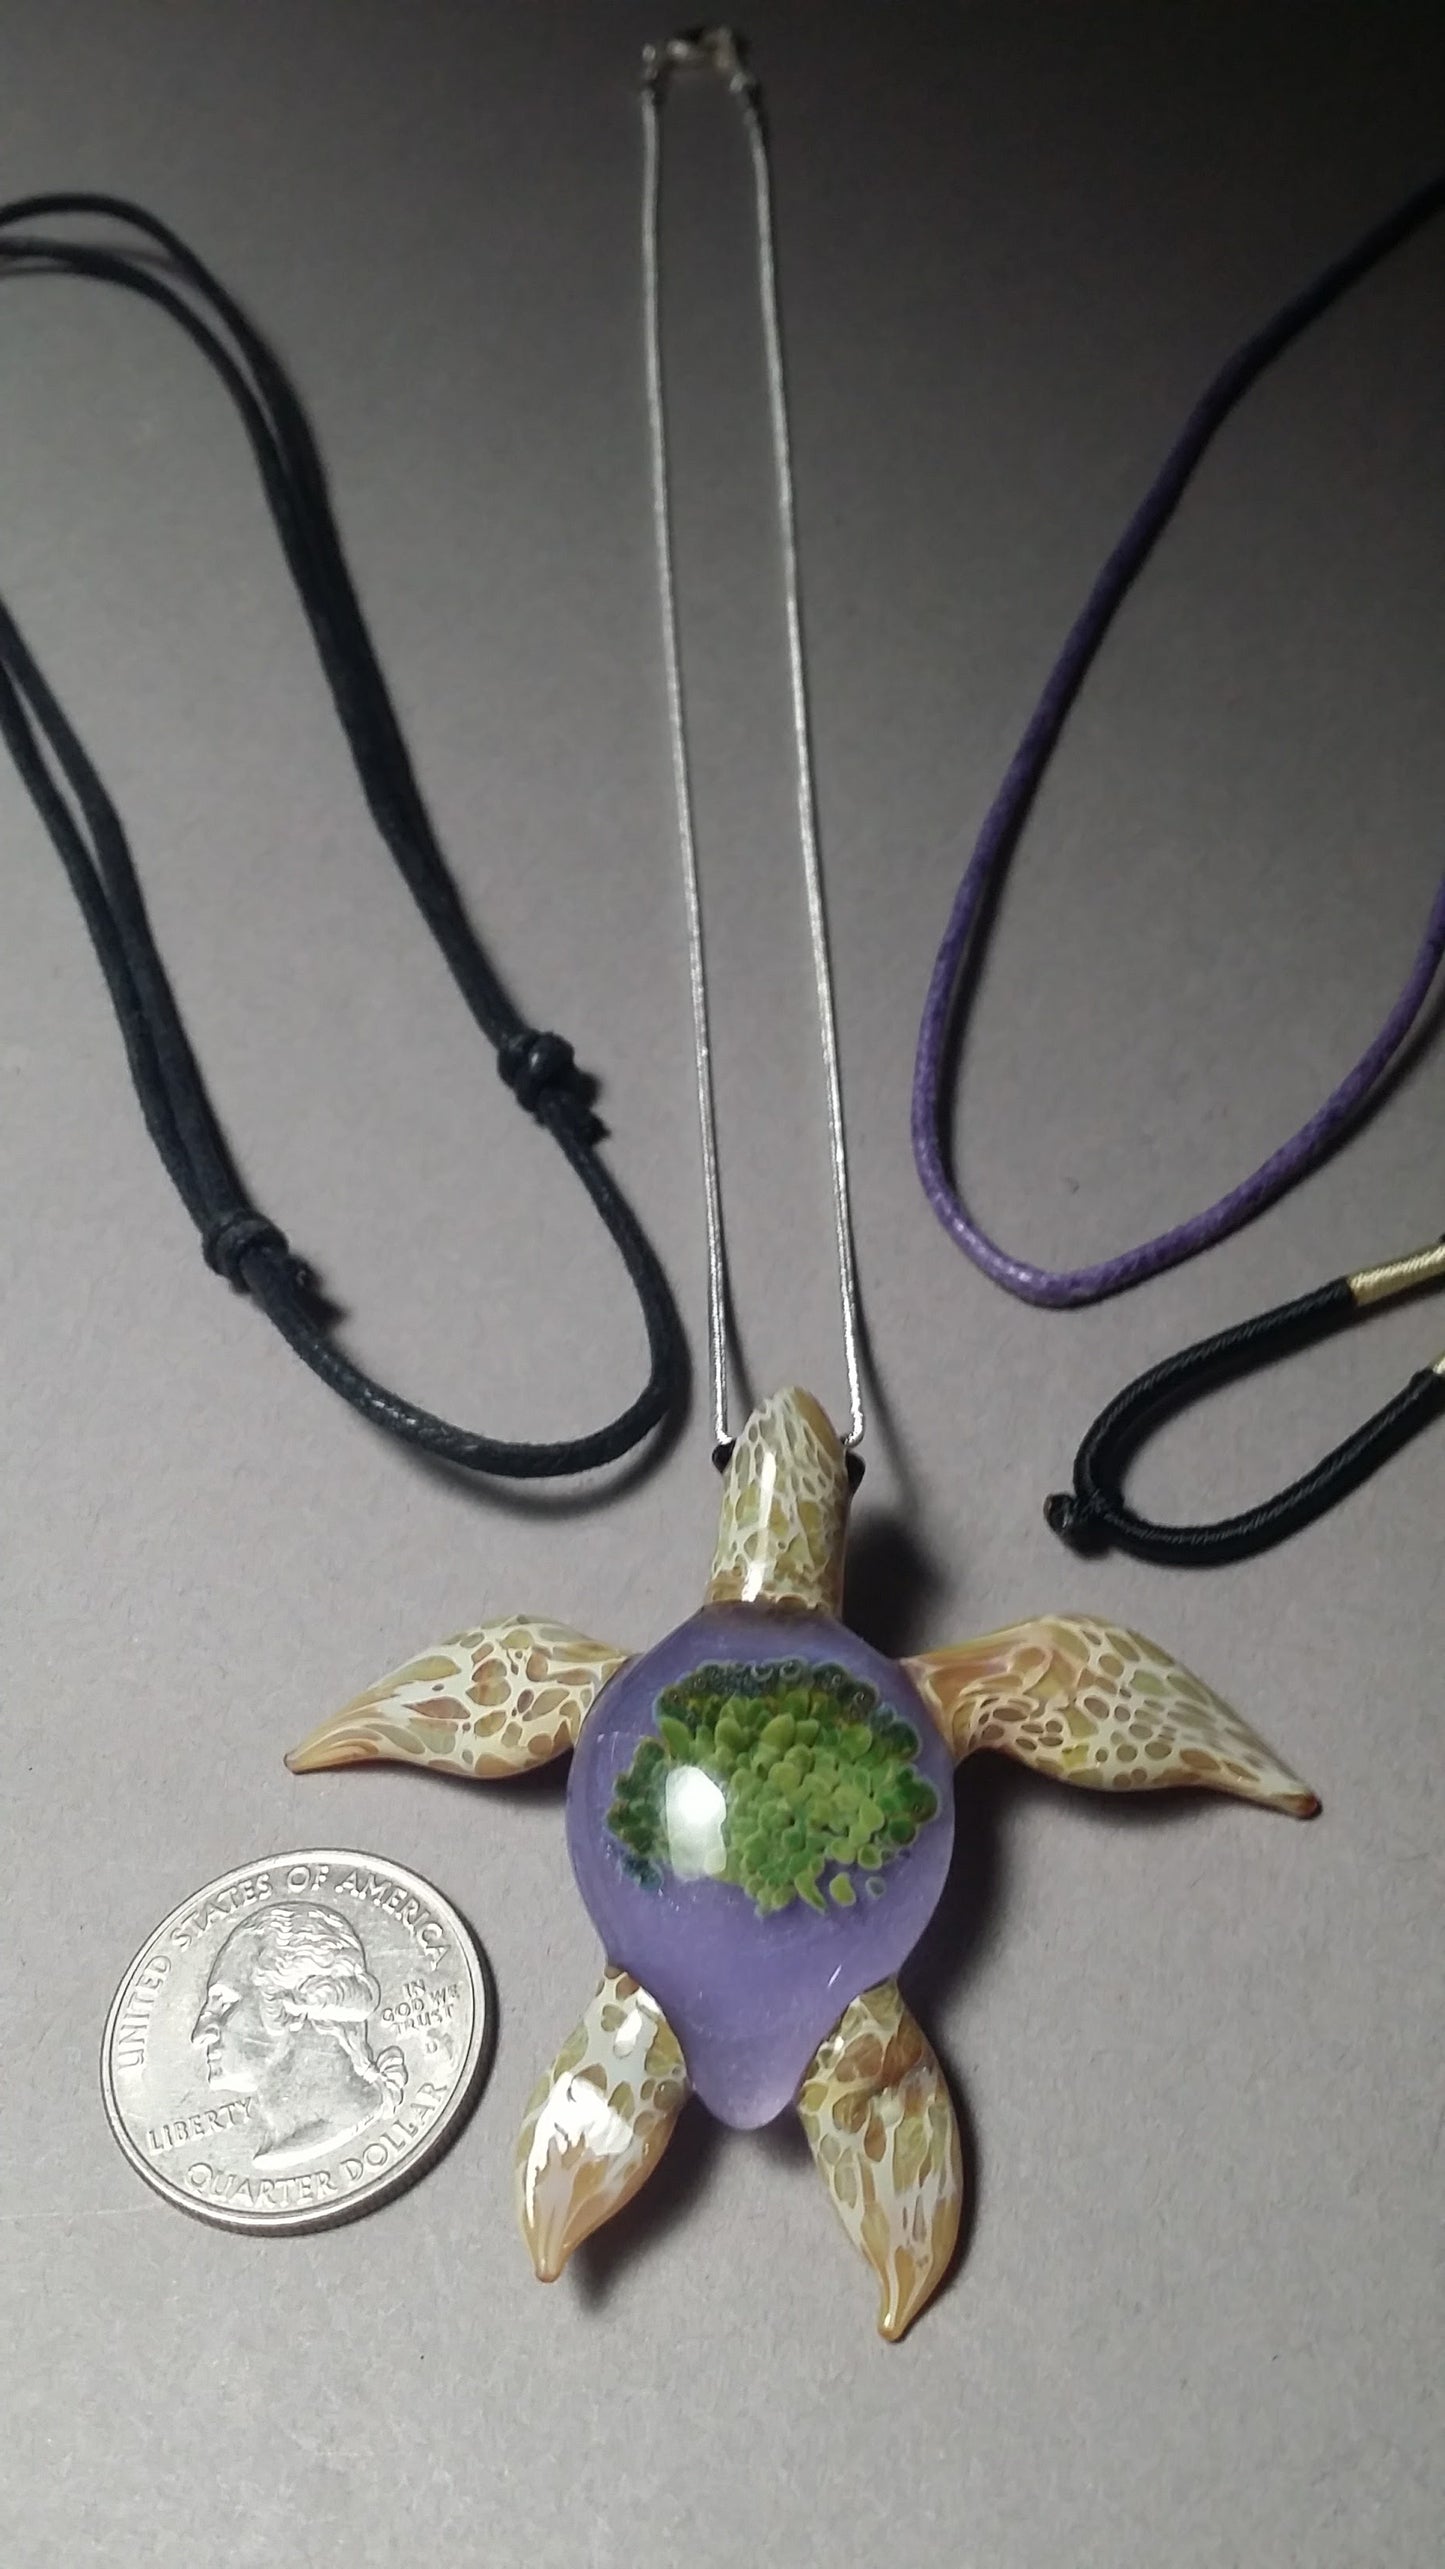 Special edition periwinkle background with green anemones in a beach blonde glass sea turtle pendant